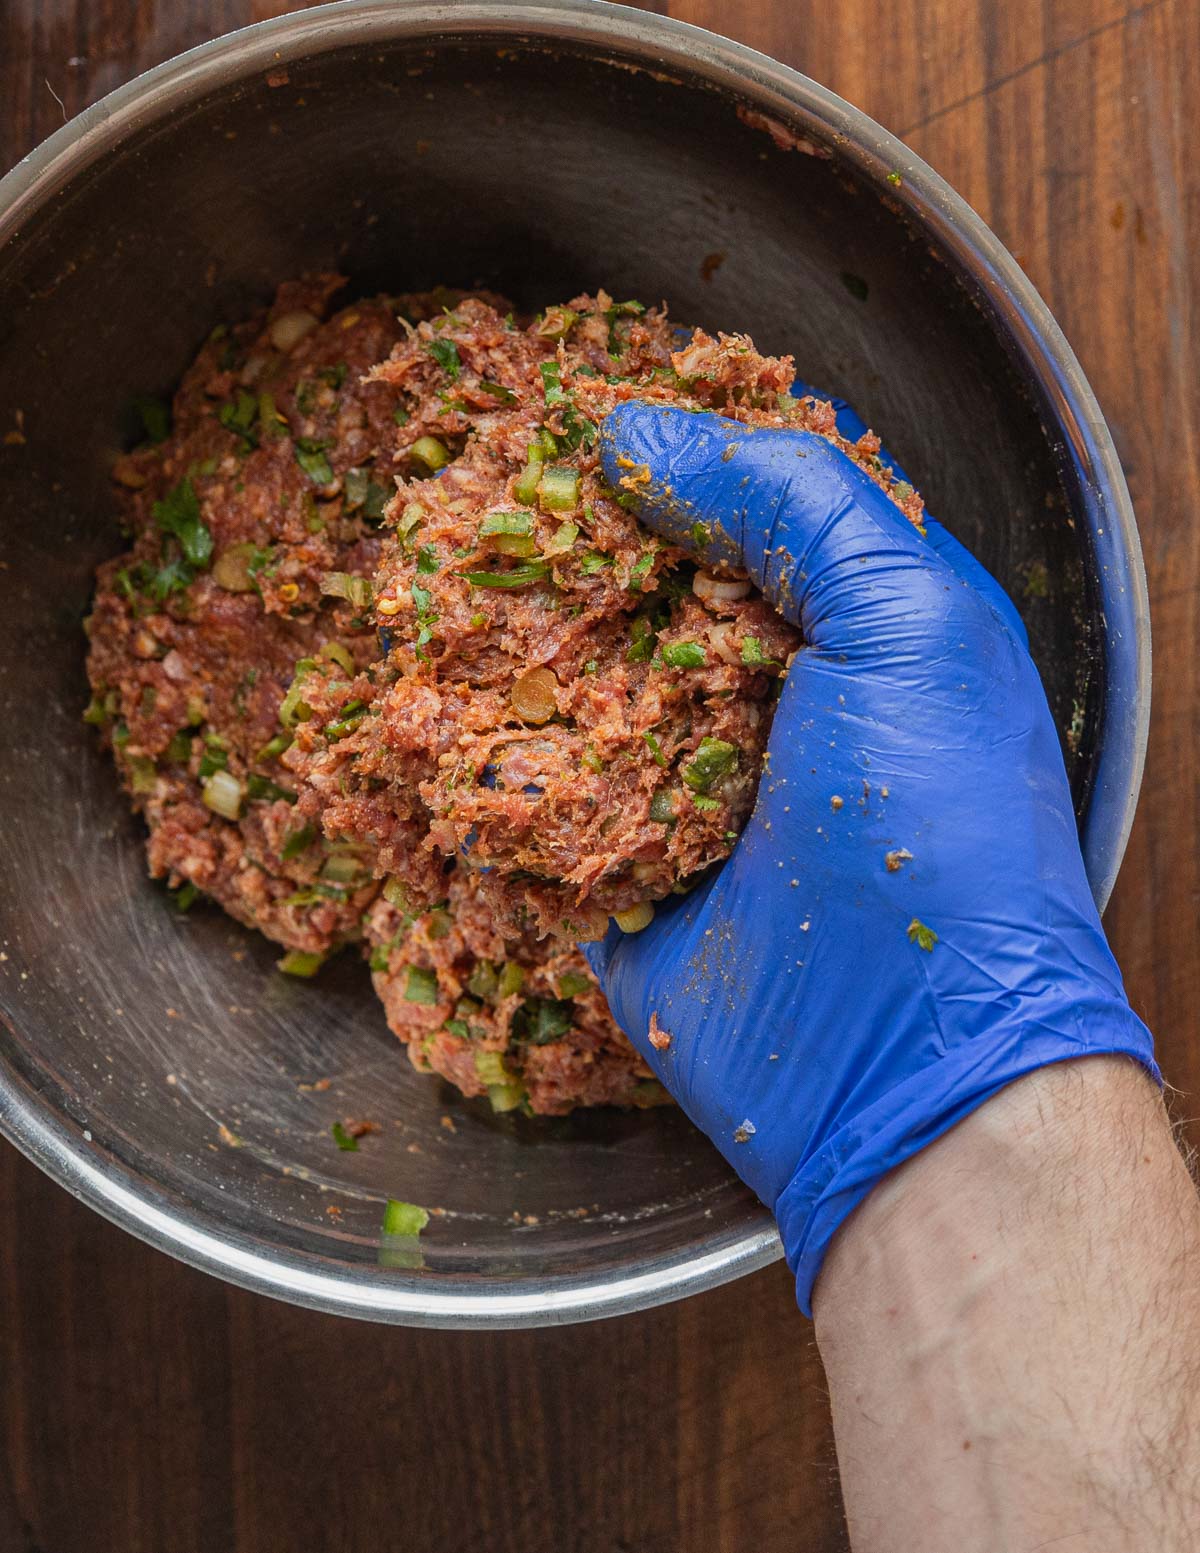 mixing meatball mixture with gloved hands.